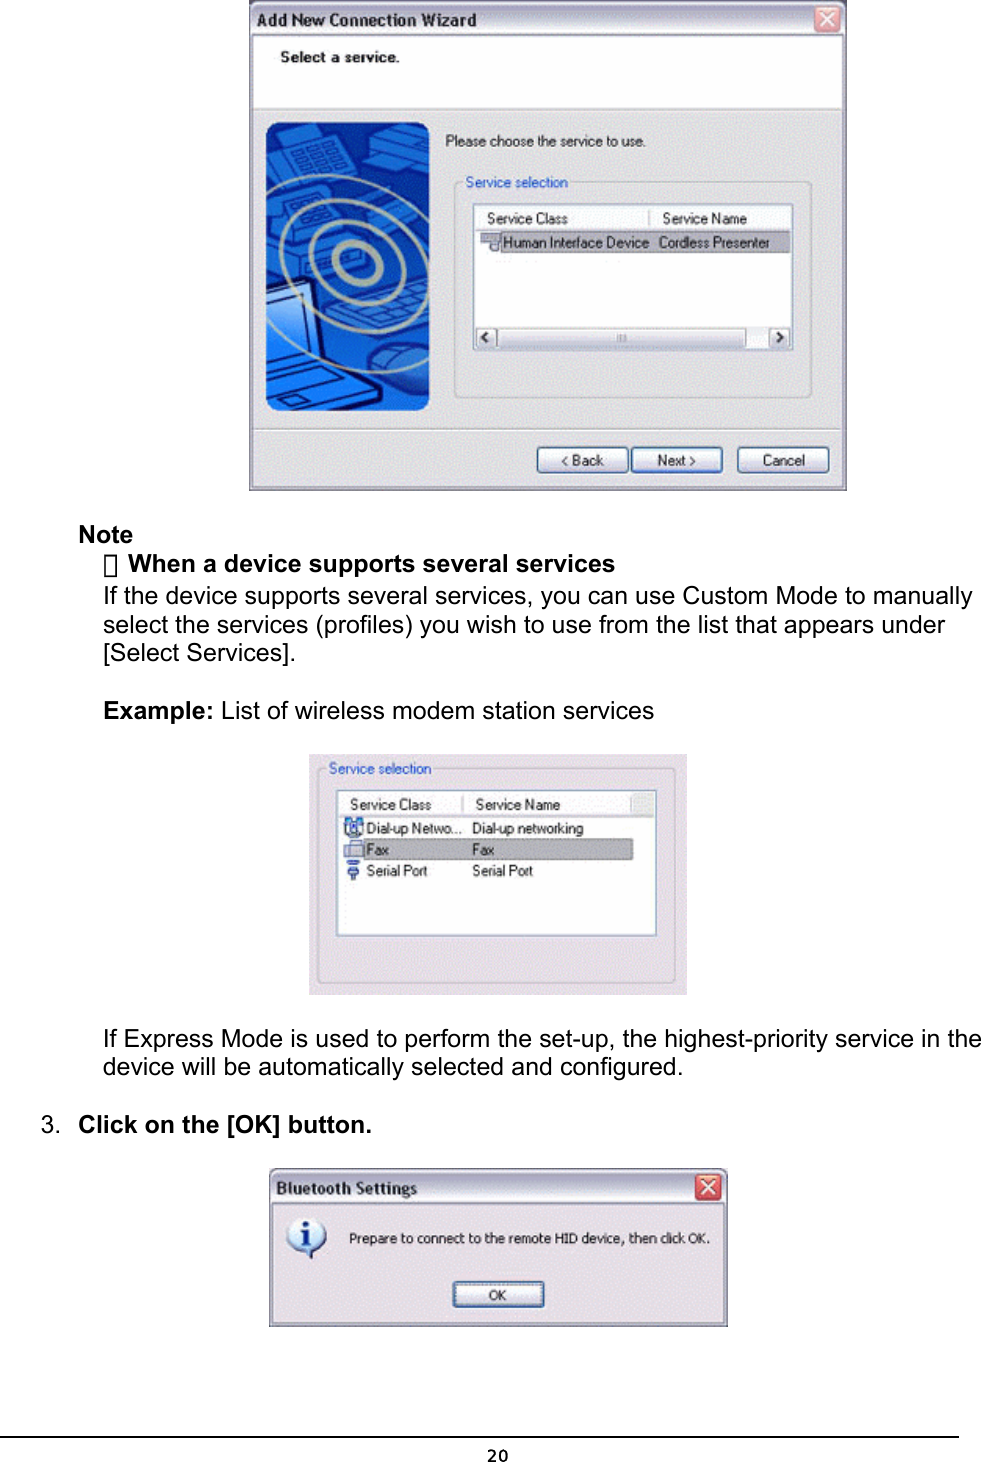   Note ．When a device supports several services If the device supports several services, you can use Custom Mode to manually select the services (profiles) you wish to use from the list that appears under [Select Services].  Example: List of wireless modem station services  If Express Mode is used to perform the set-up, the highest-priority service in the device will be automatically selected and configured. 3.  Click on the [OK] button.   20